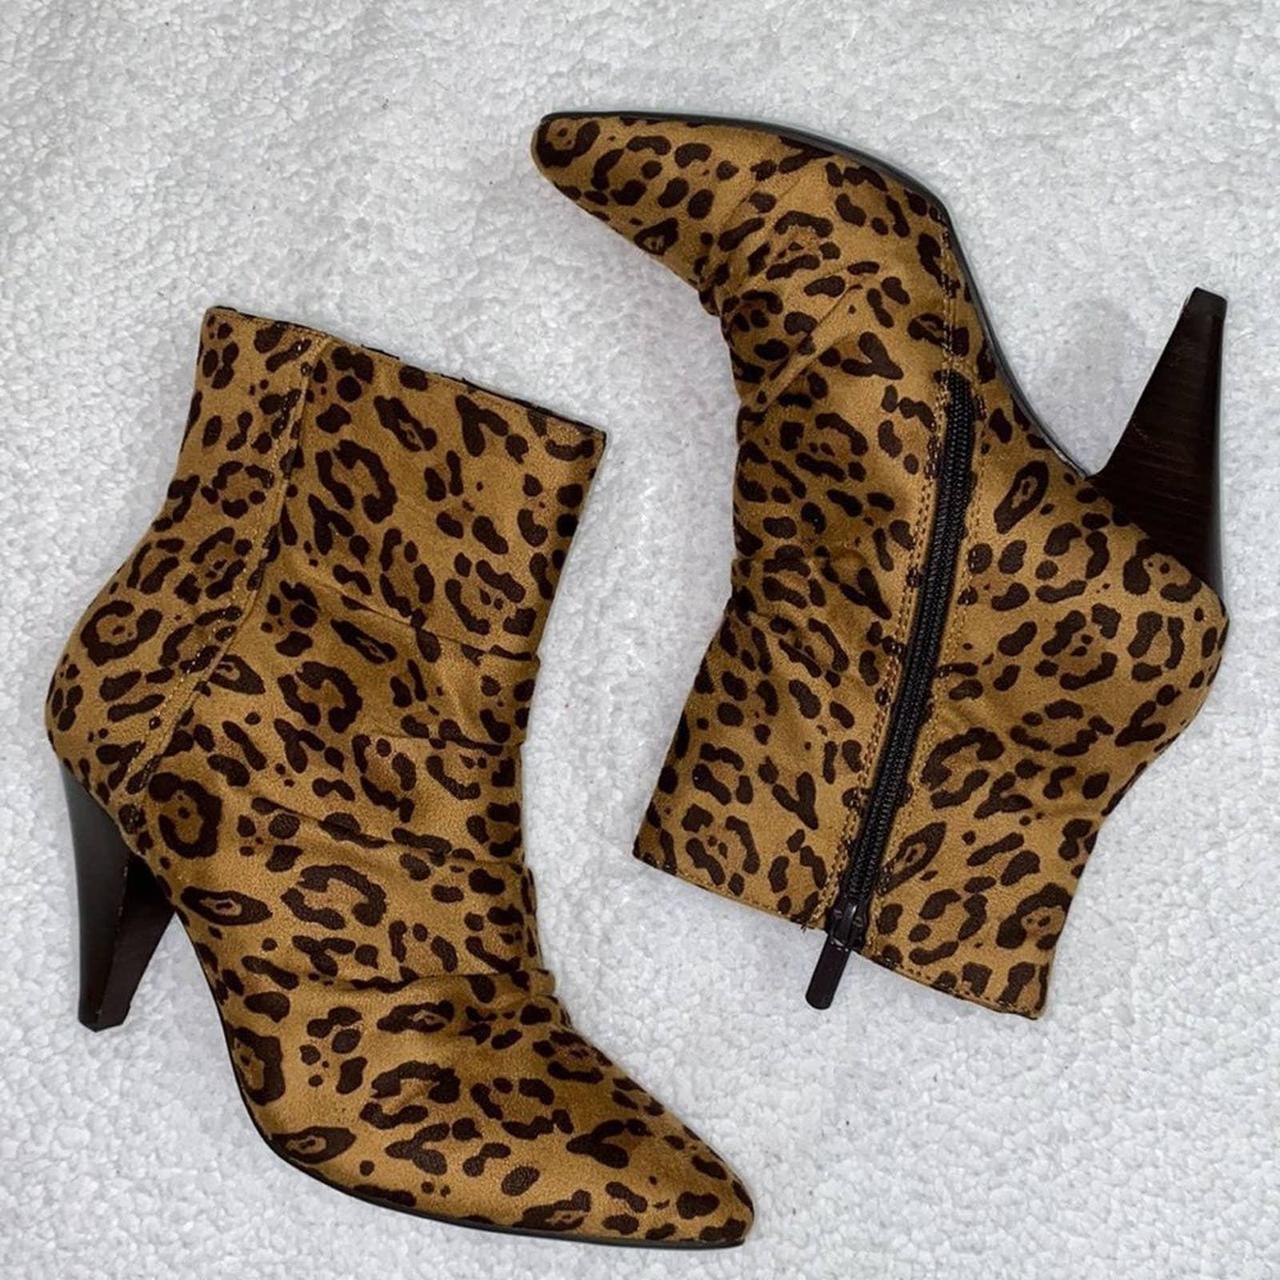 Product Image 2 - Impo Leopard Print Ankle Booties,Faux